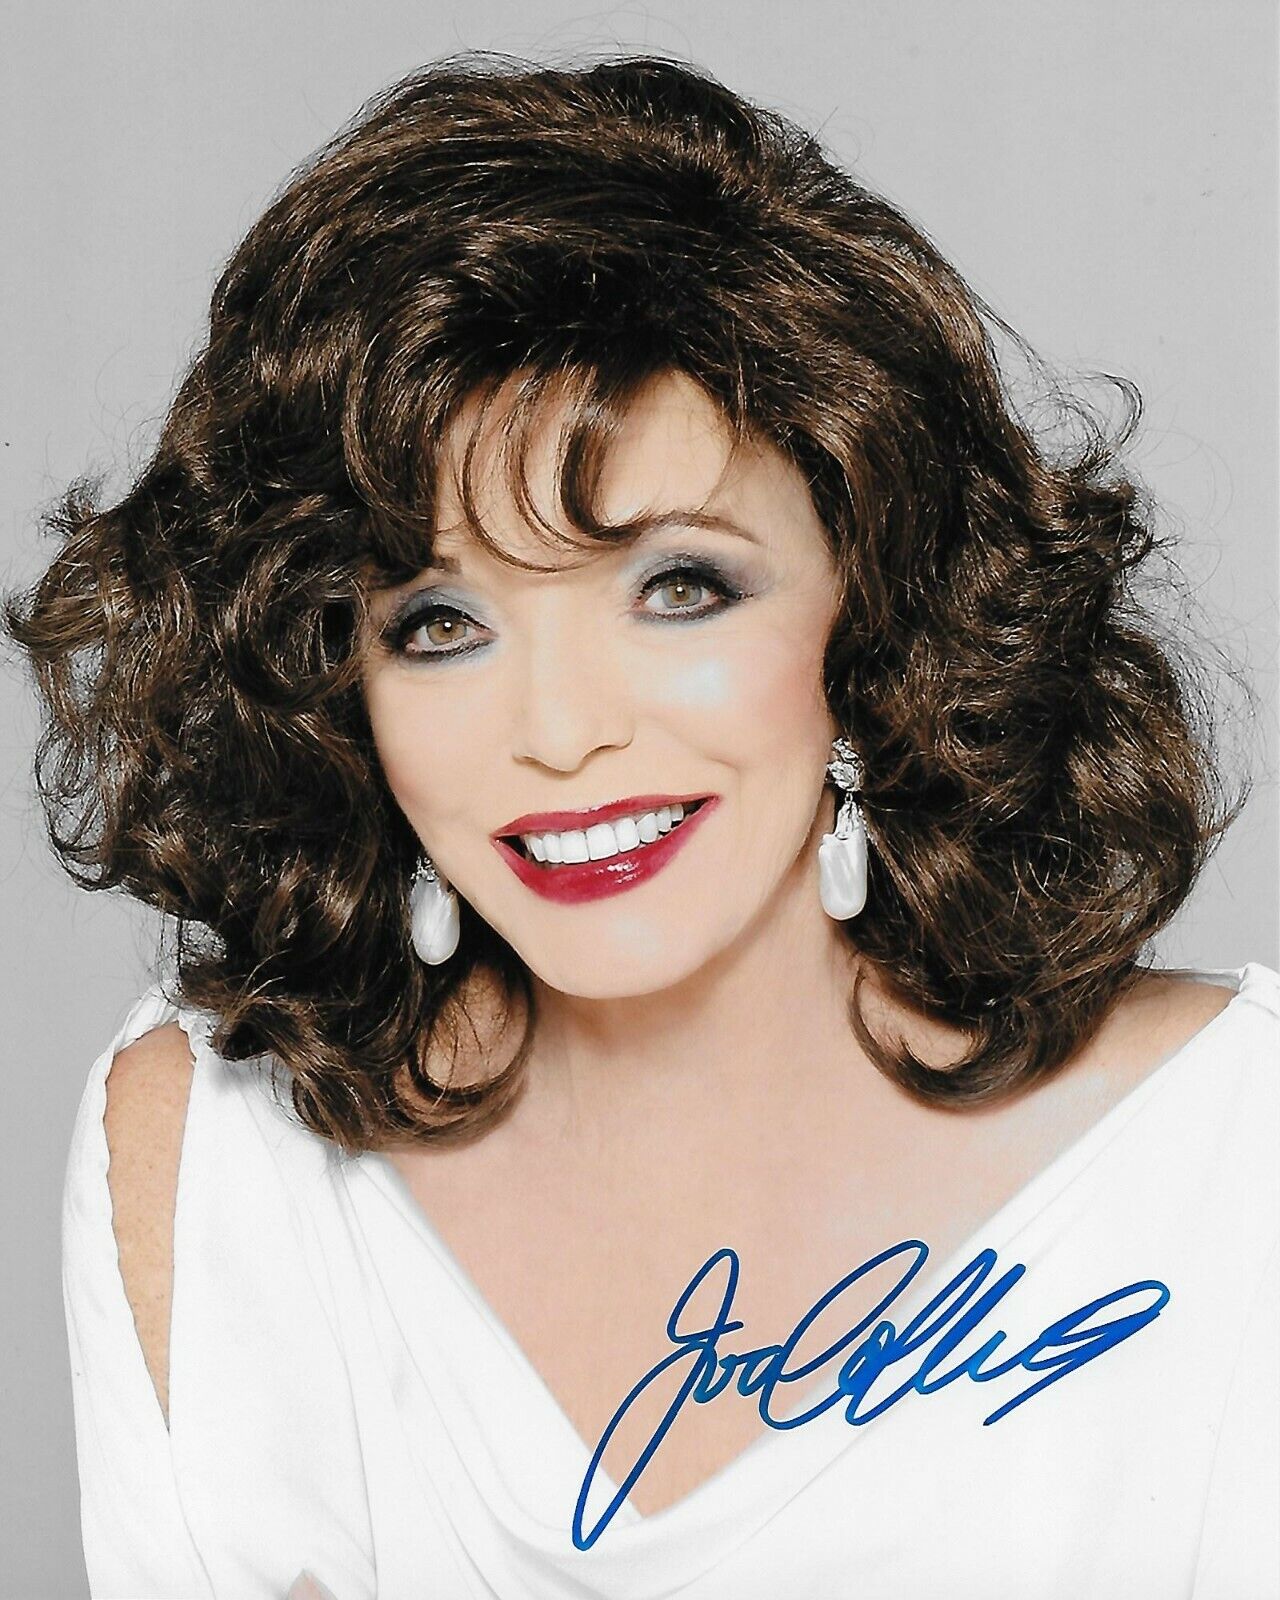 Joan Collins Original Autographed 8X10 Photo Poster painting #42 signed @Hollywood Show -Dynasty